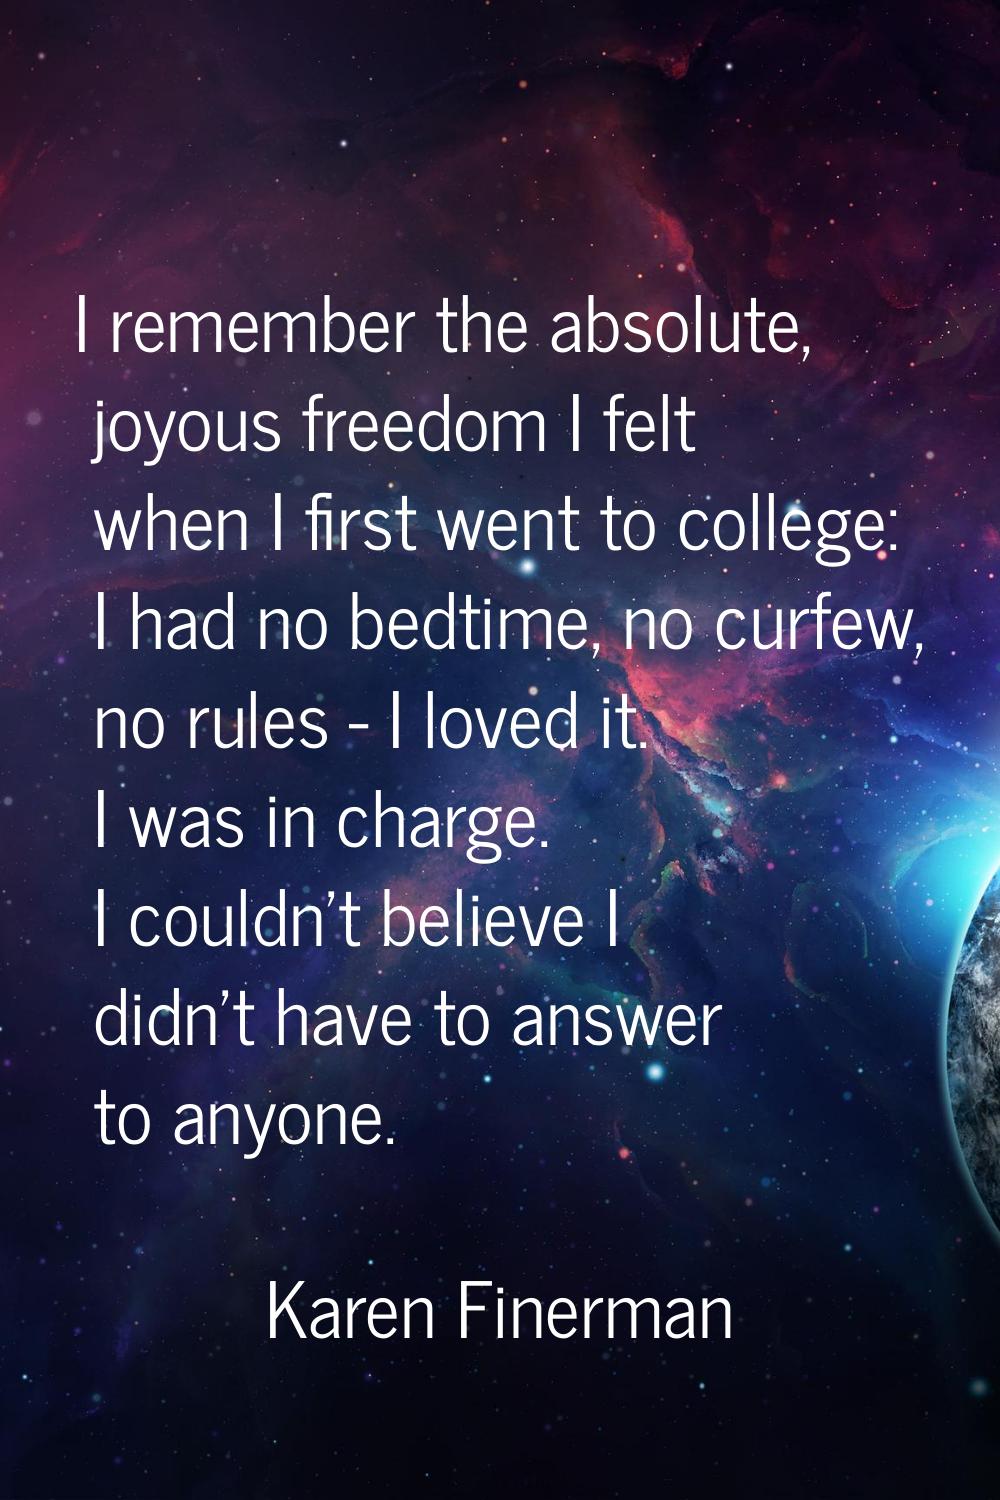 I remember the absolute, joyous freedom I felt when I first went to college: I had no bedtime, no c